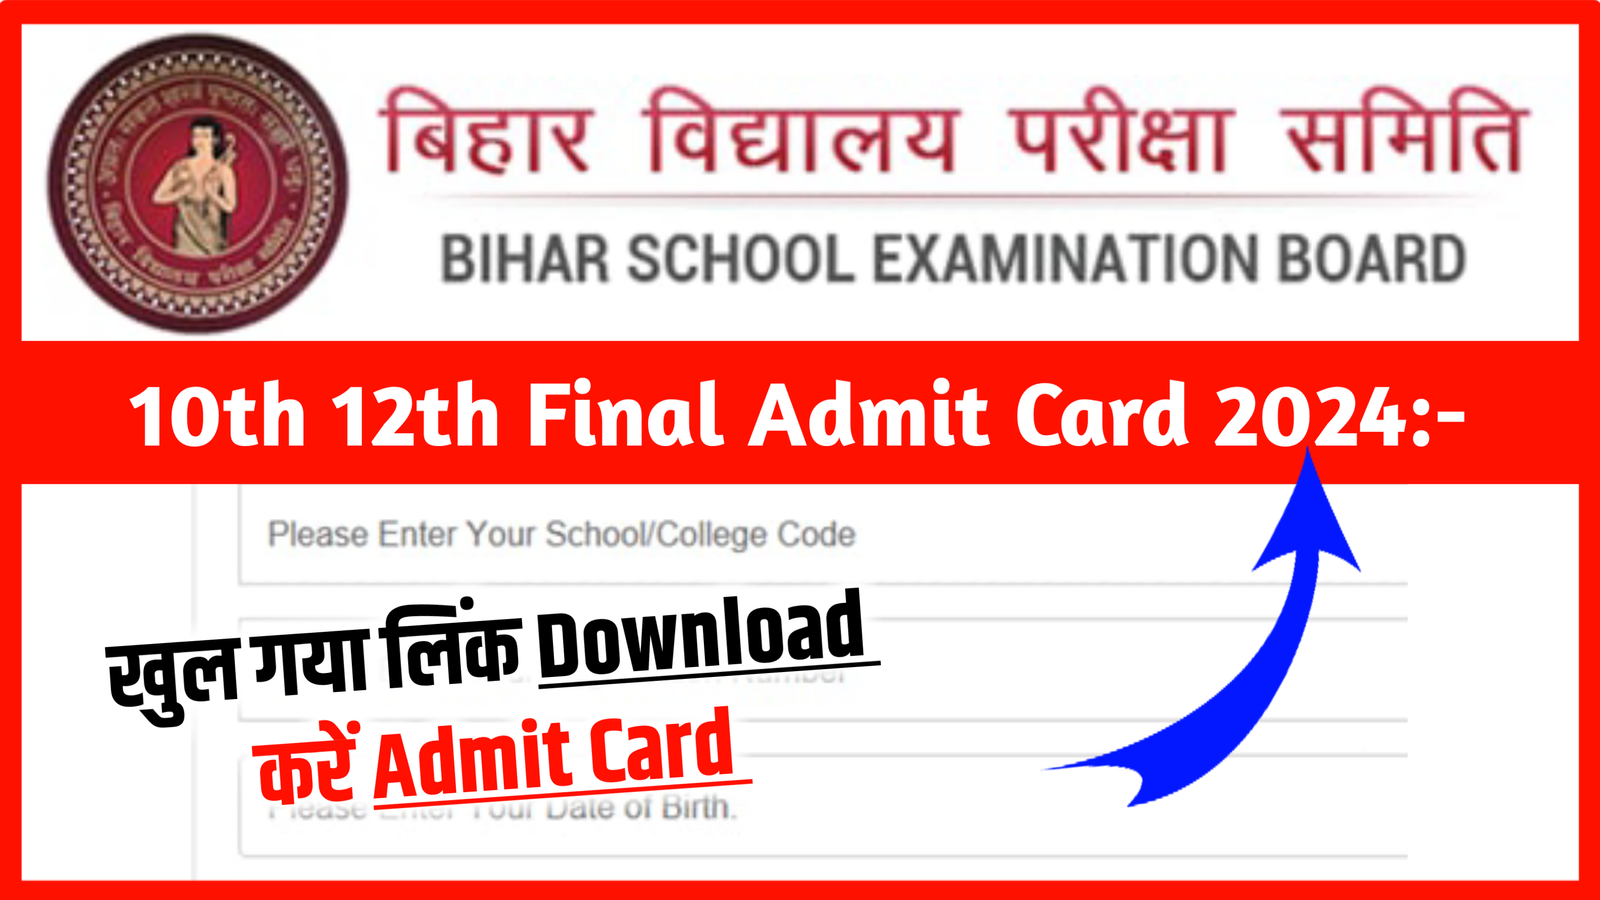 Bihar BSEB 10th 12th Admit Card Download Now: